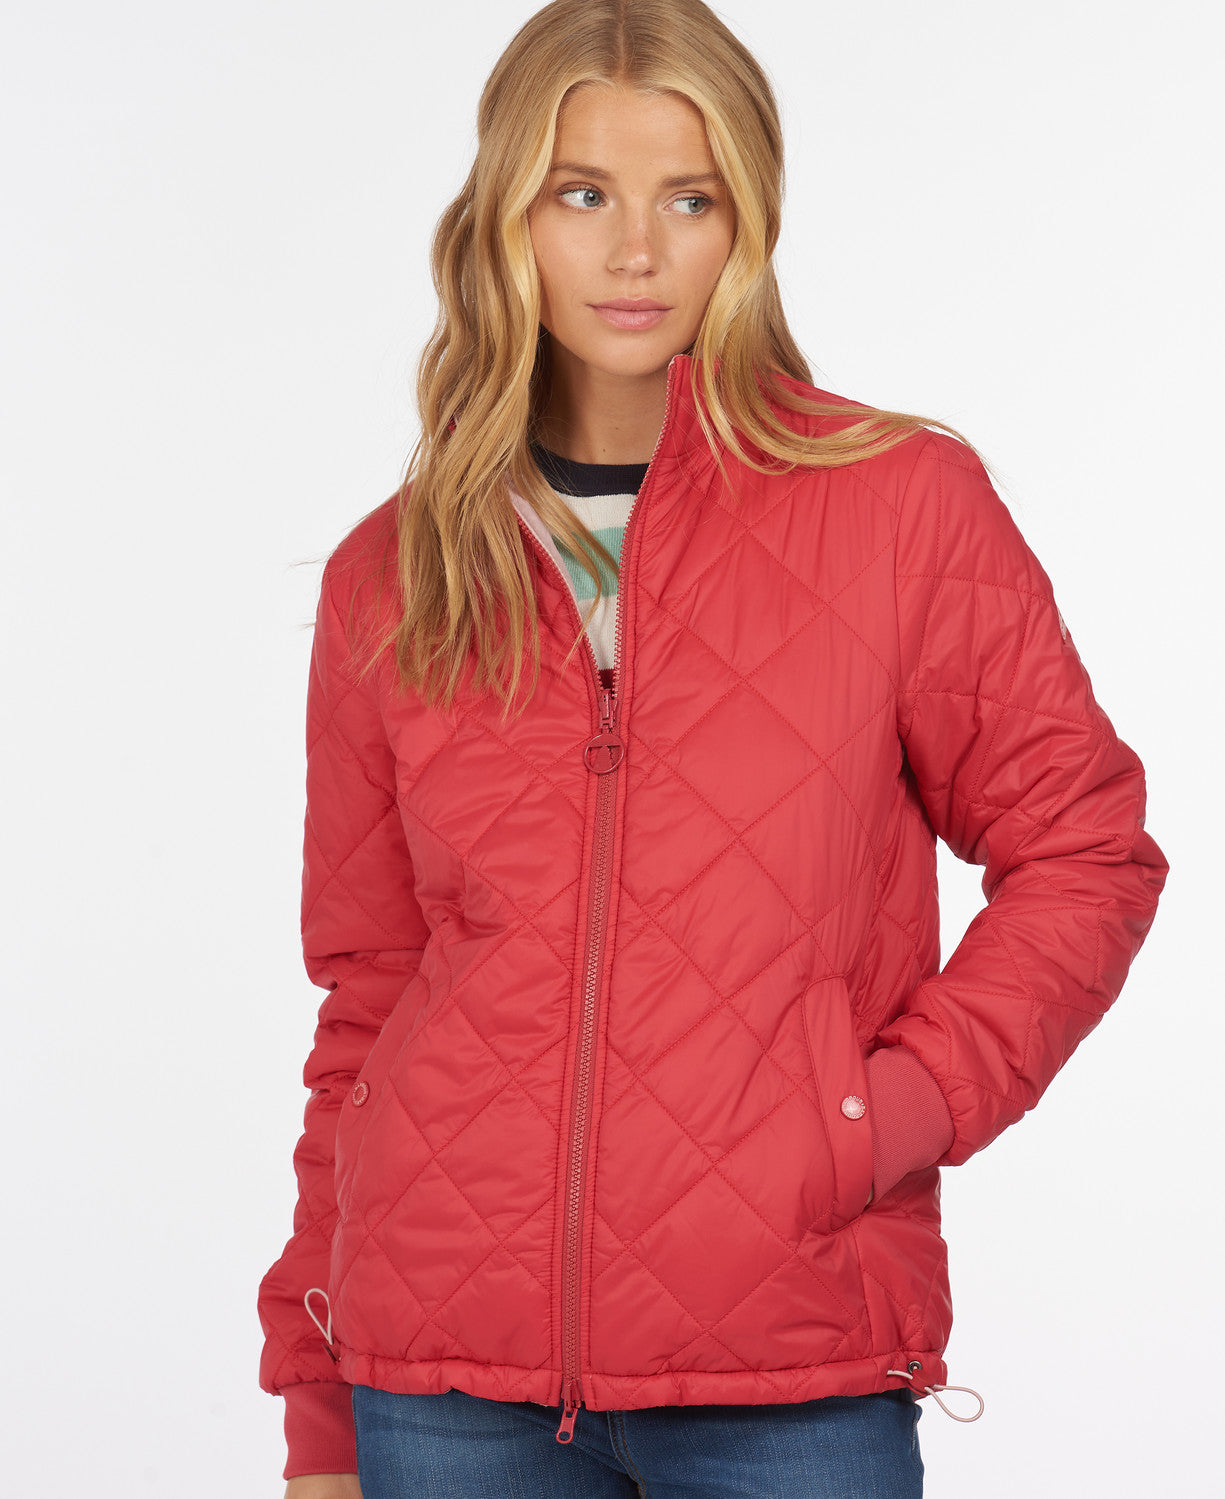 Southport Quilted Jacket - Ocean Red/Blusher